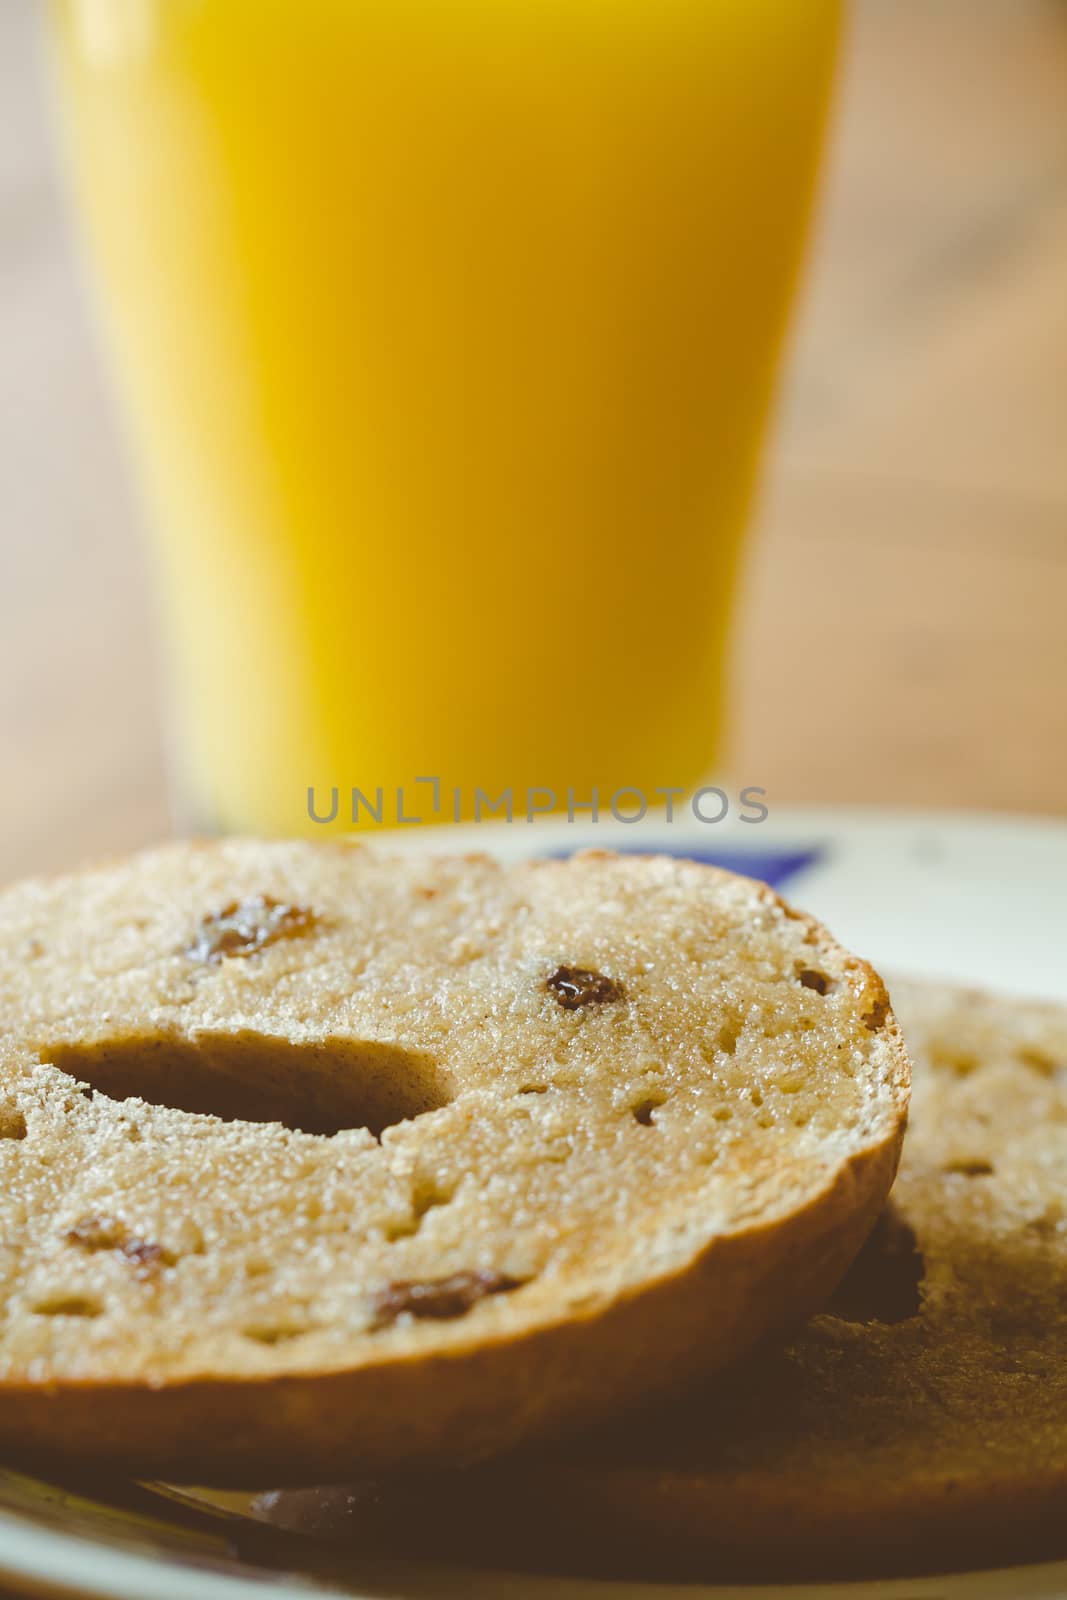 A glass of orange juice and a sliced toasted raisin and cinnamon bagel